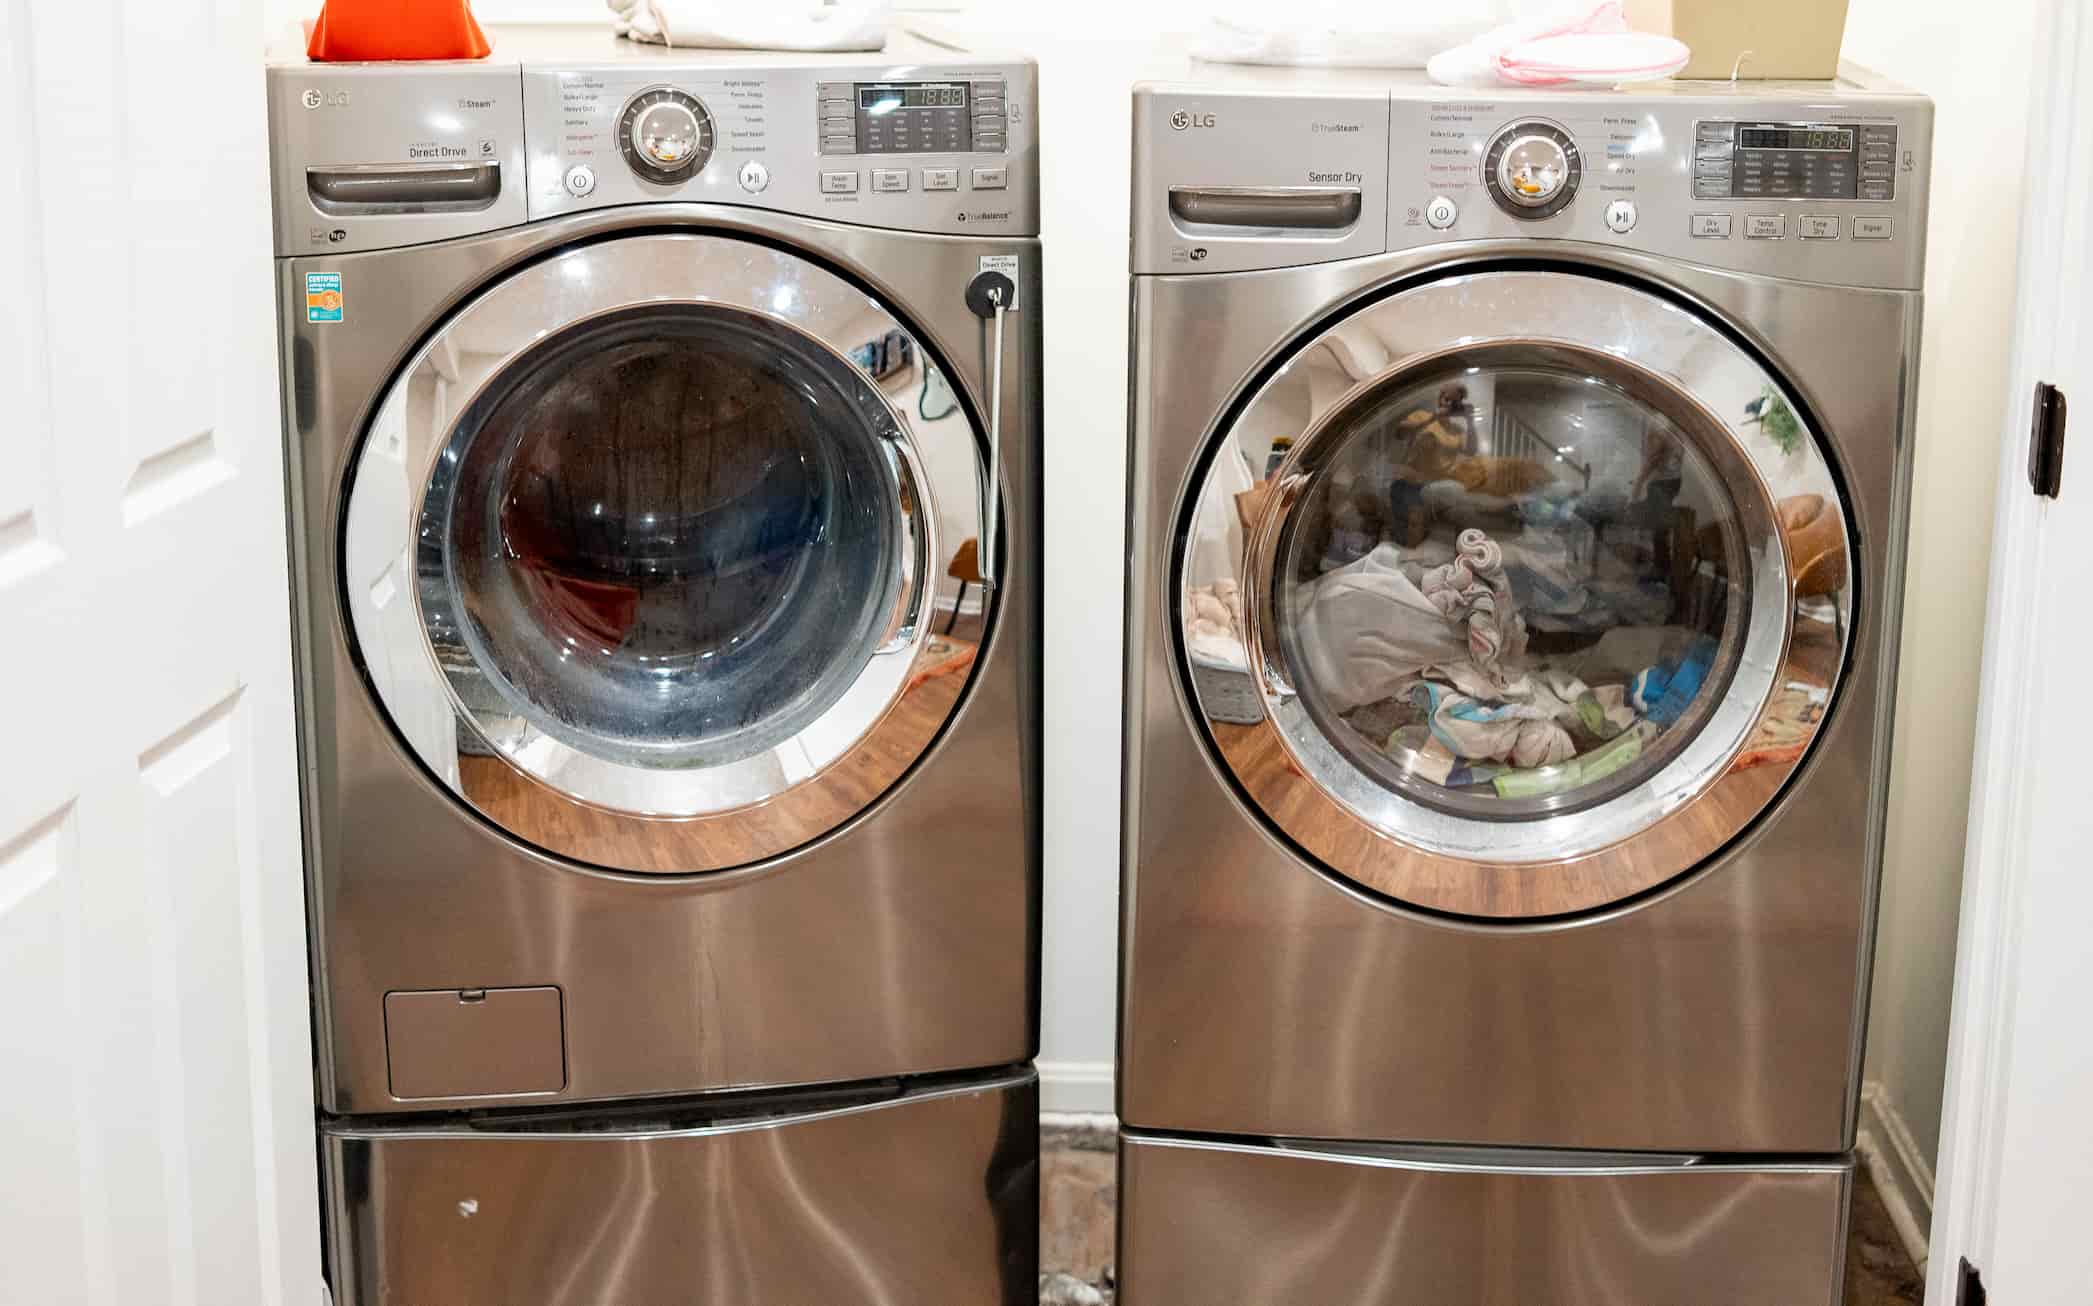 DIY Without Fear | How To Remove The Pedestal From A Washer And Dryer (4 Steps)